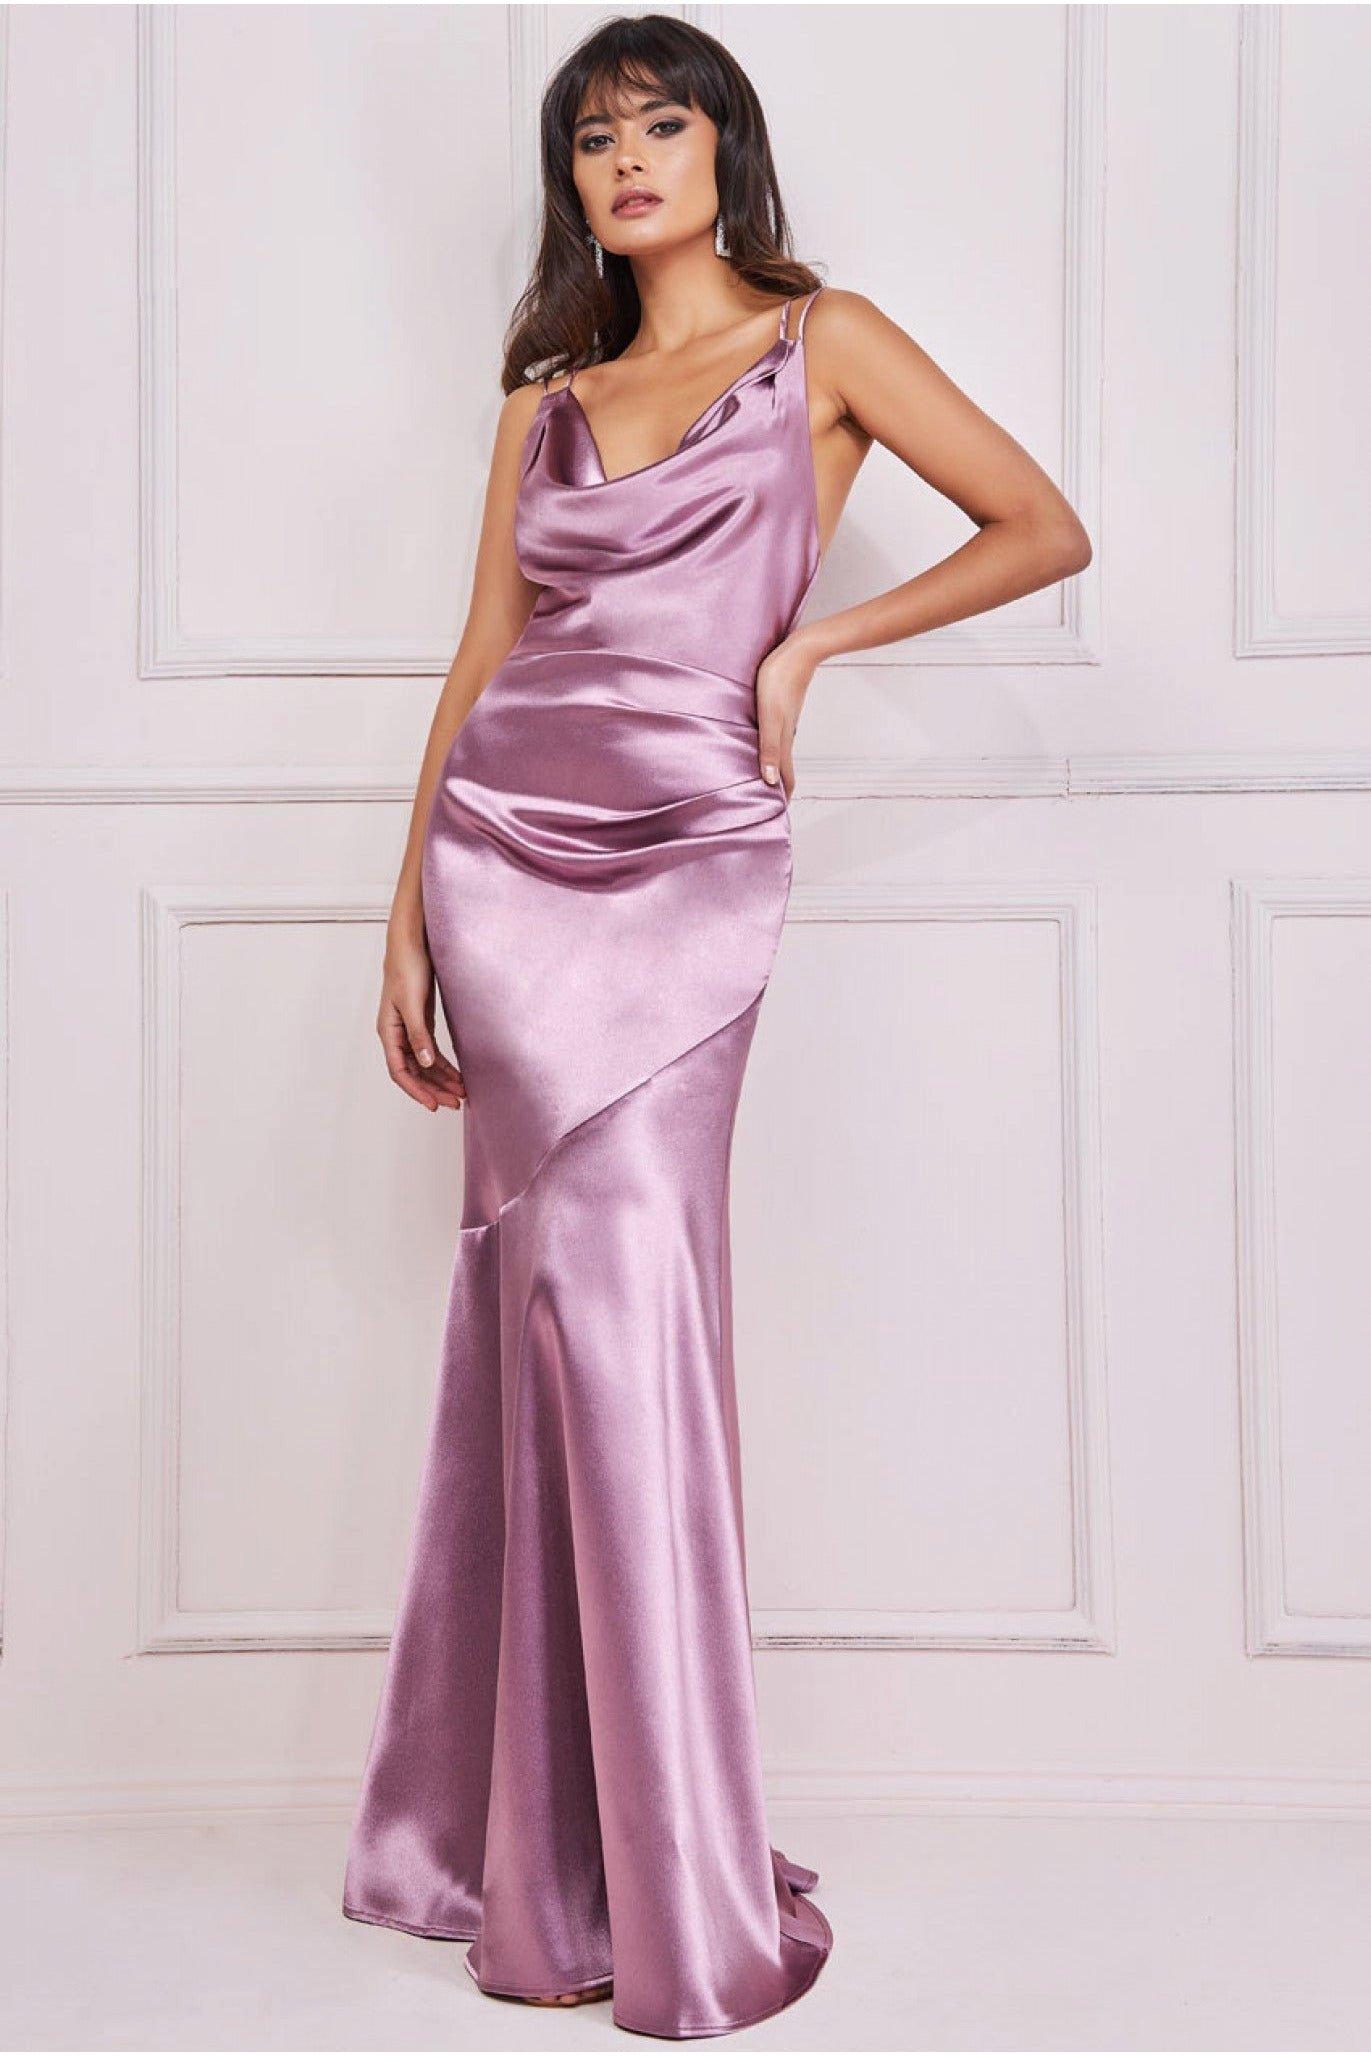 Cowl Neck With Strappy Back Satin Maxi